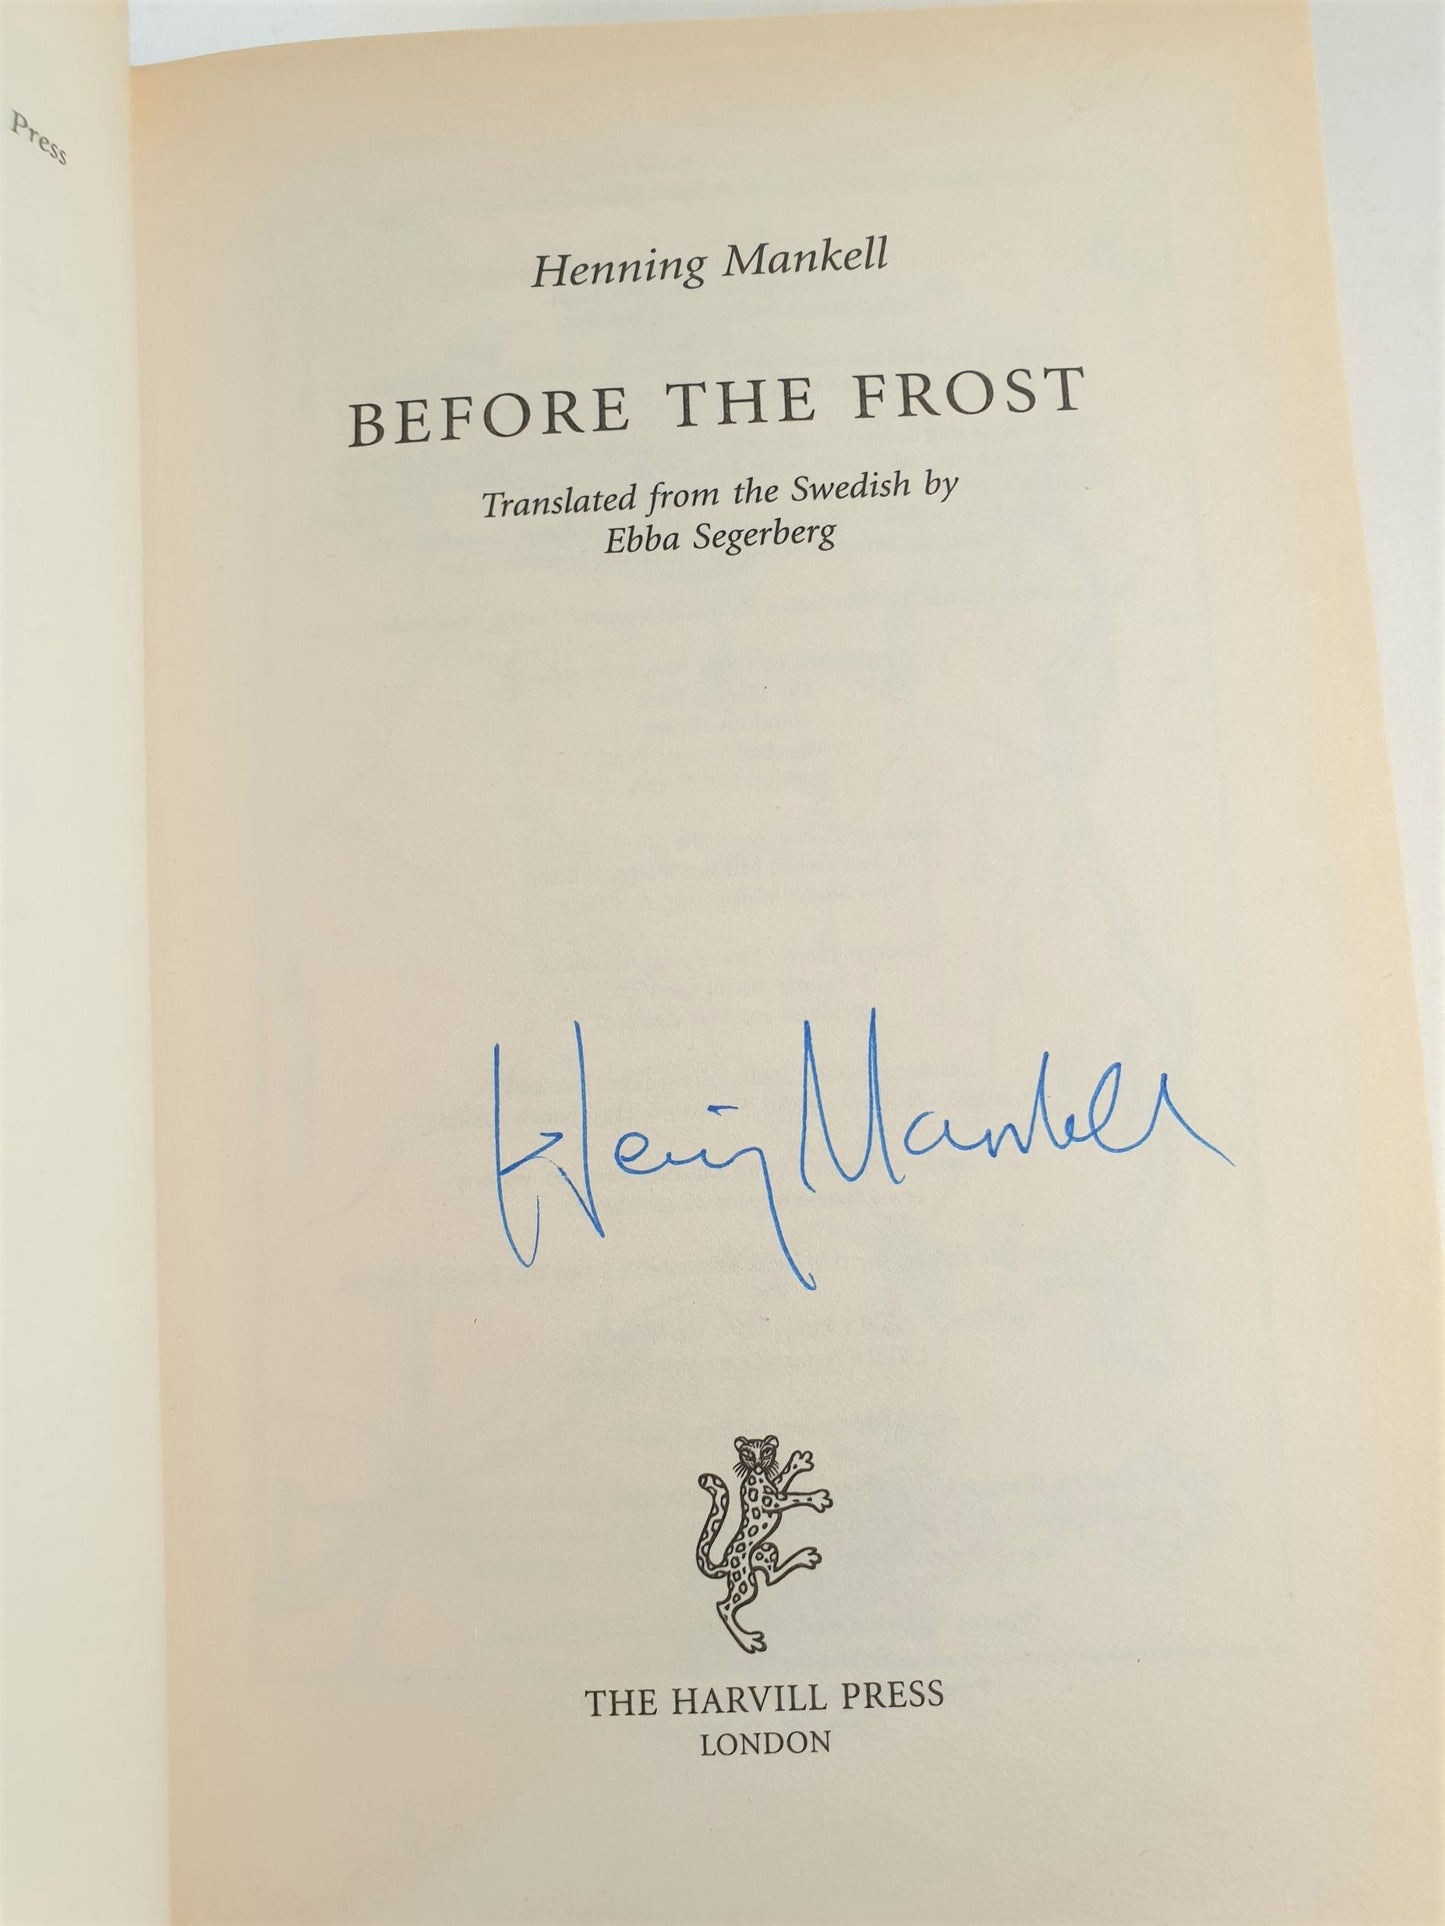 Mankell, Henning - Before the Frost (Signed)